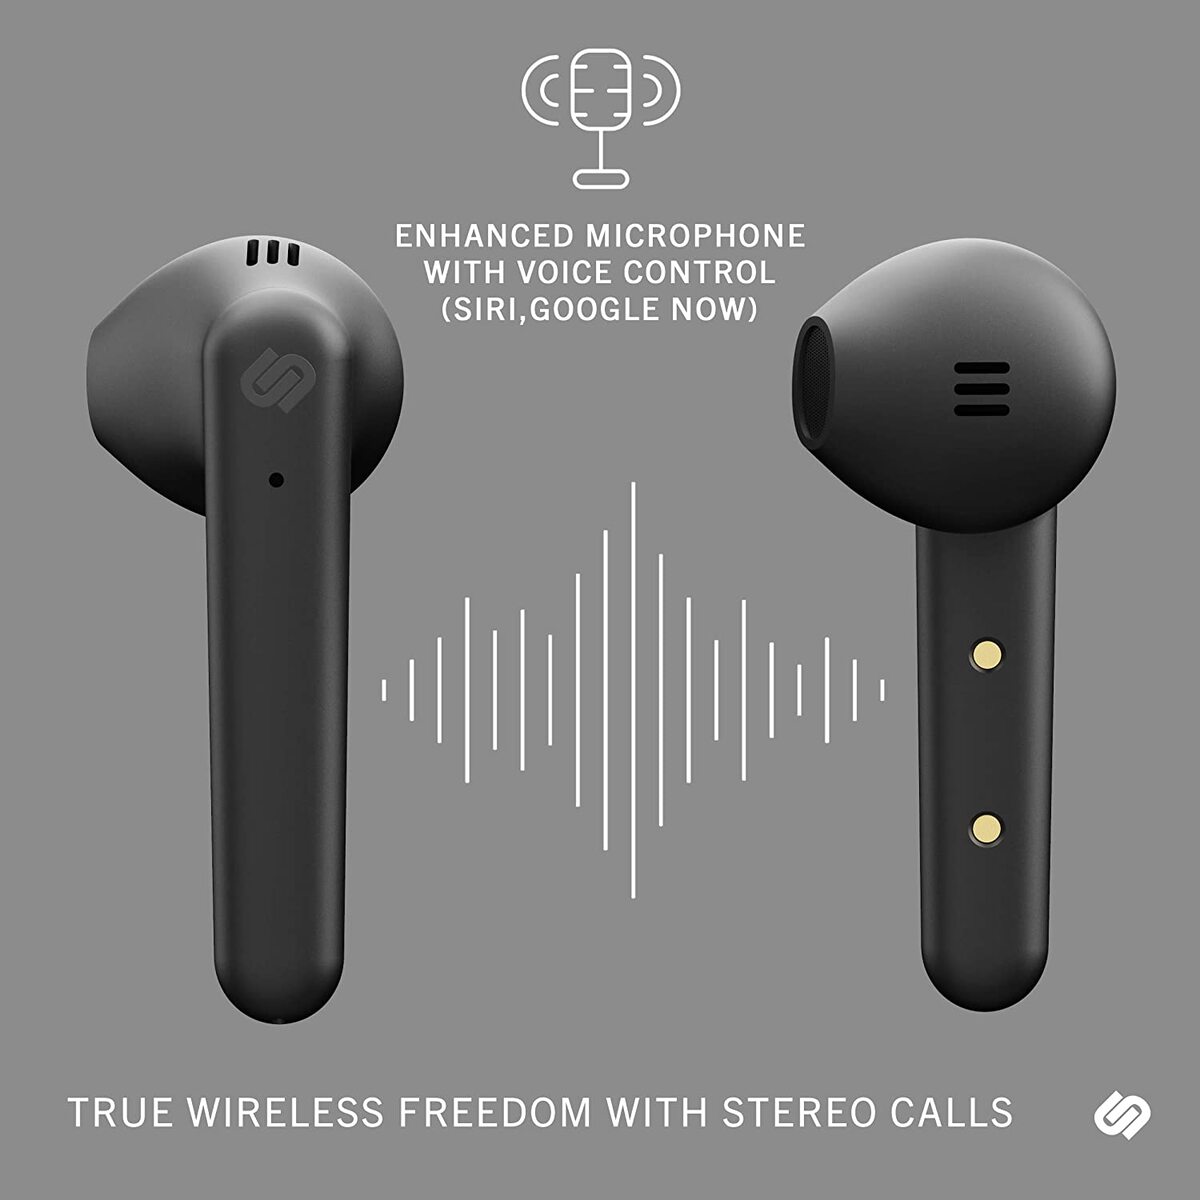 For Blue True Active Headphones UAE London Touch Wireless True | Earphones, Microphones Playtime, 6 Bluetooth Cancelling, Online at Lulu Earbuds With Best 5.0 Controls 25 | Wireless Earbud Noise Urbanista Hours Price Clear Calling, &